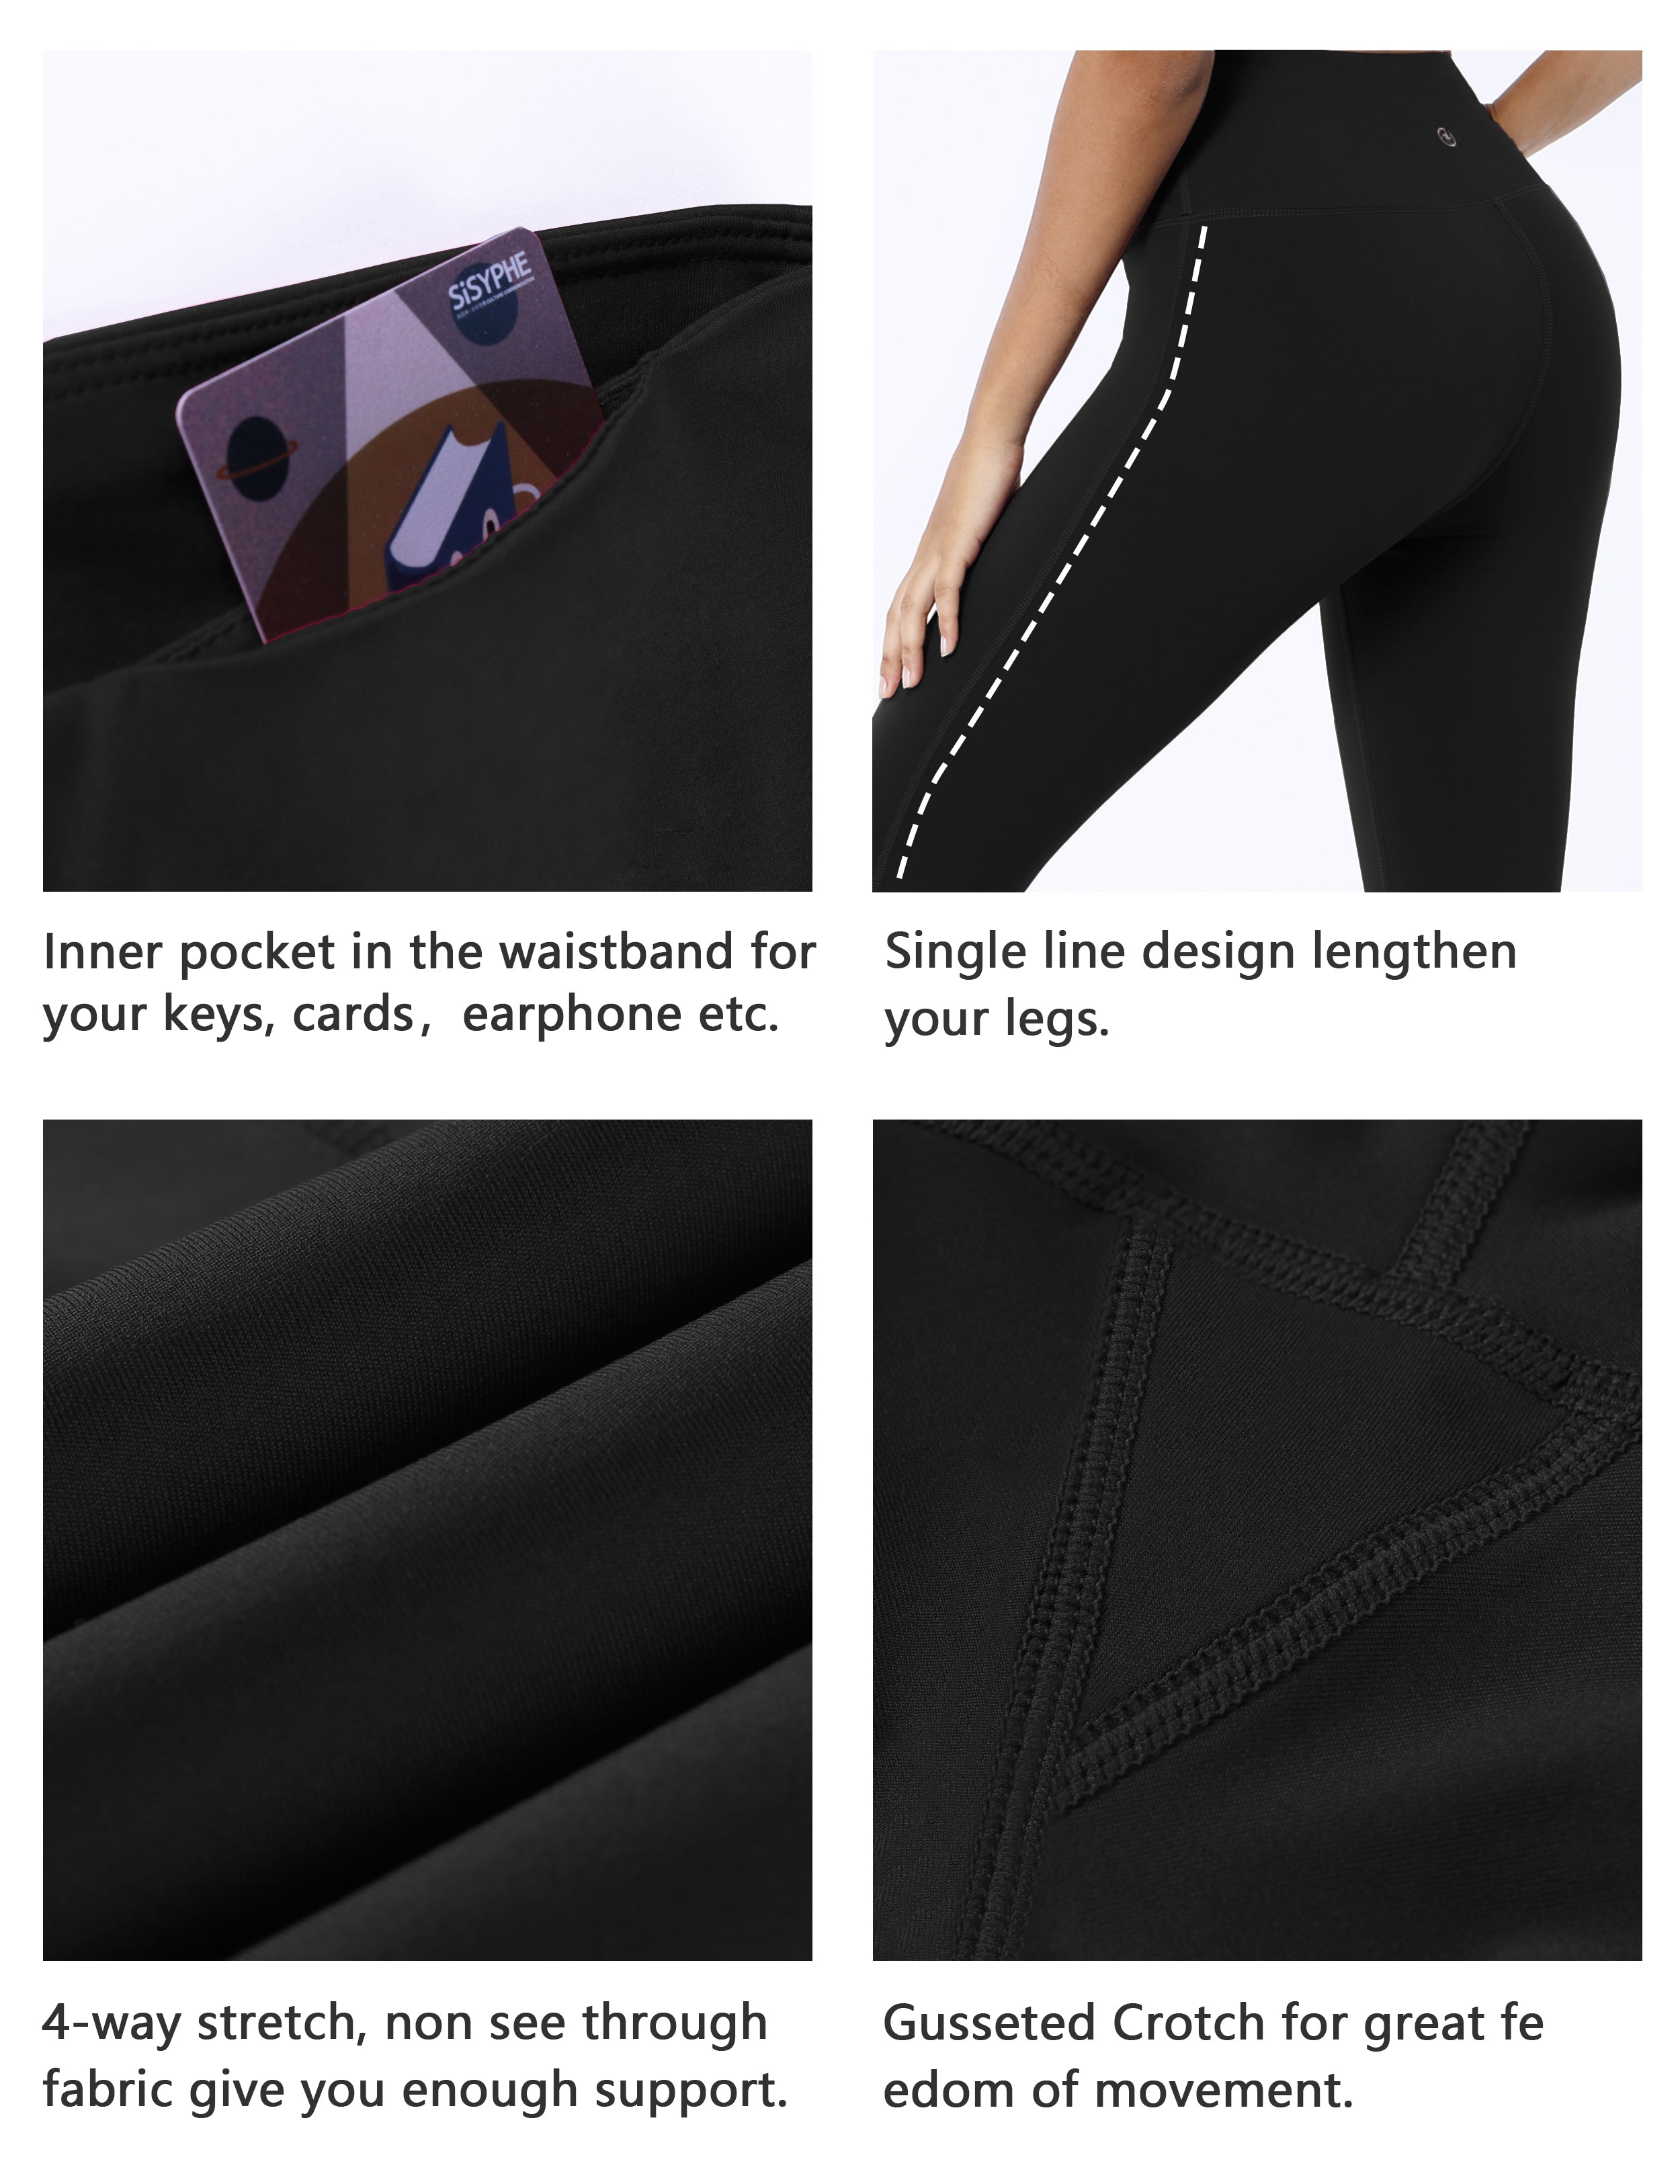 High Waist Side Line Yoga Pants black Side Line is Make Your Legs Look Longer and Thinner 75%Nylon/25%Spandex Fabric doesn't attract lint easily 4-way stretch No see-through Moisture-wicking Tummy control Inner pocket Two lengths